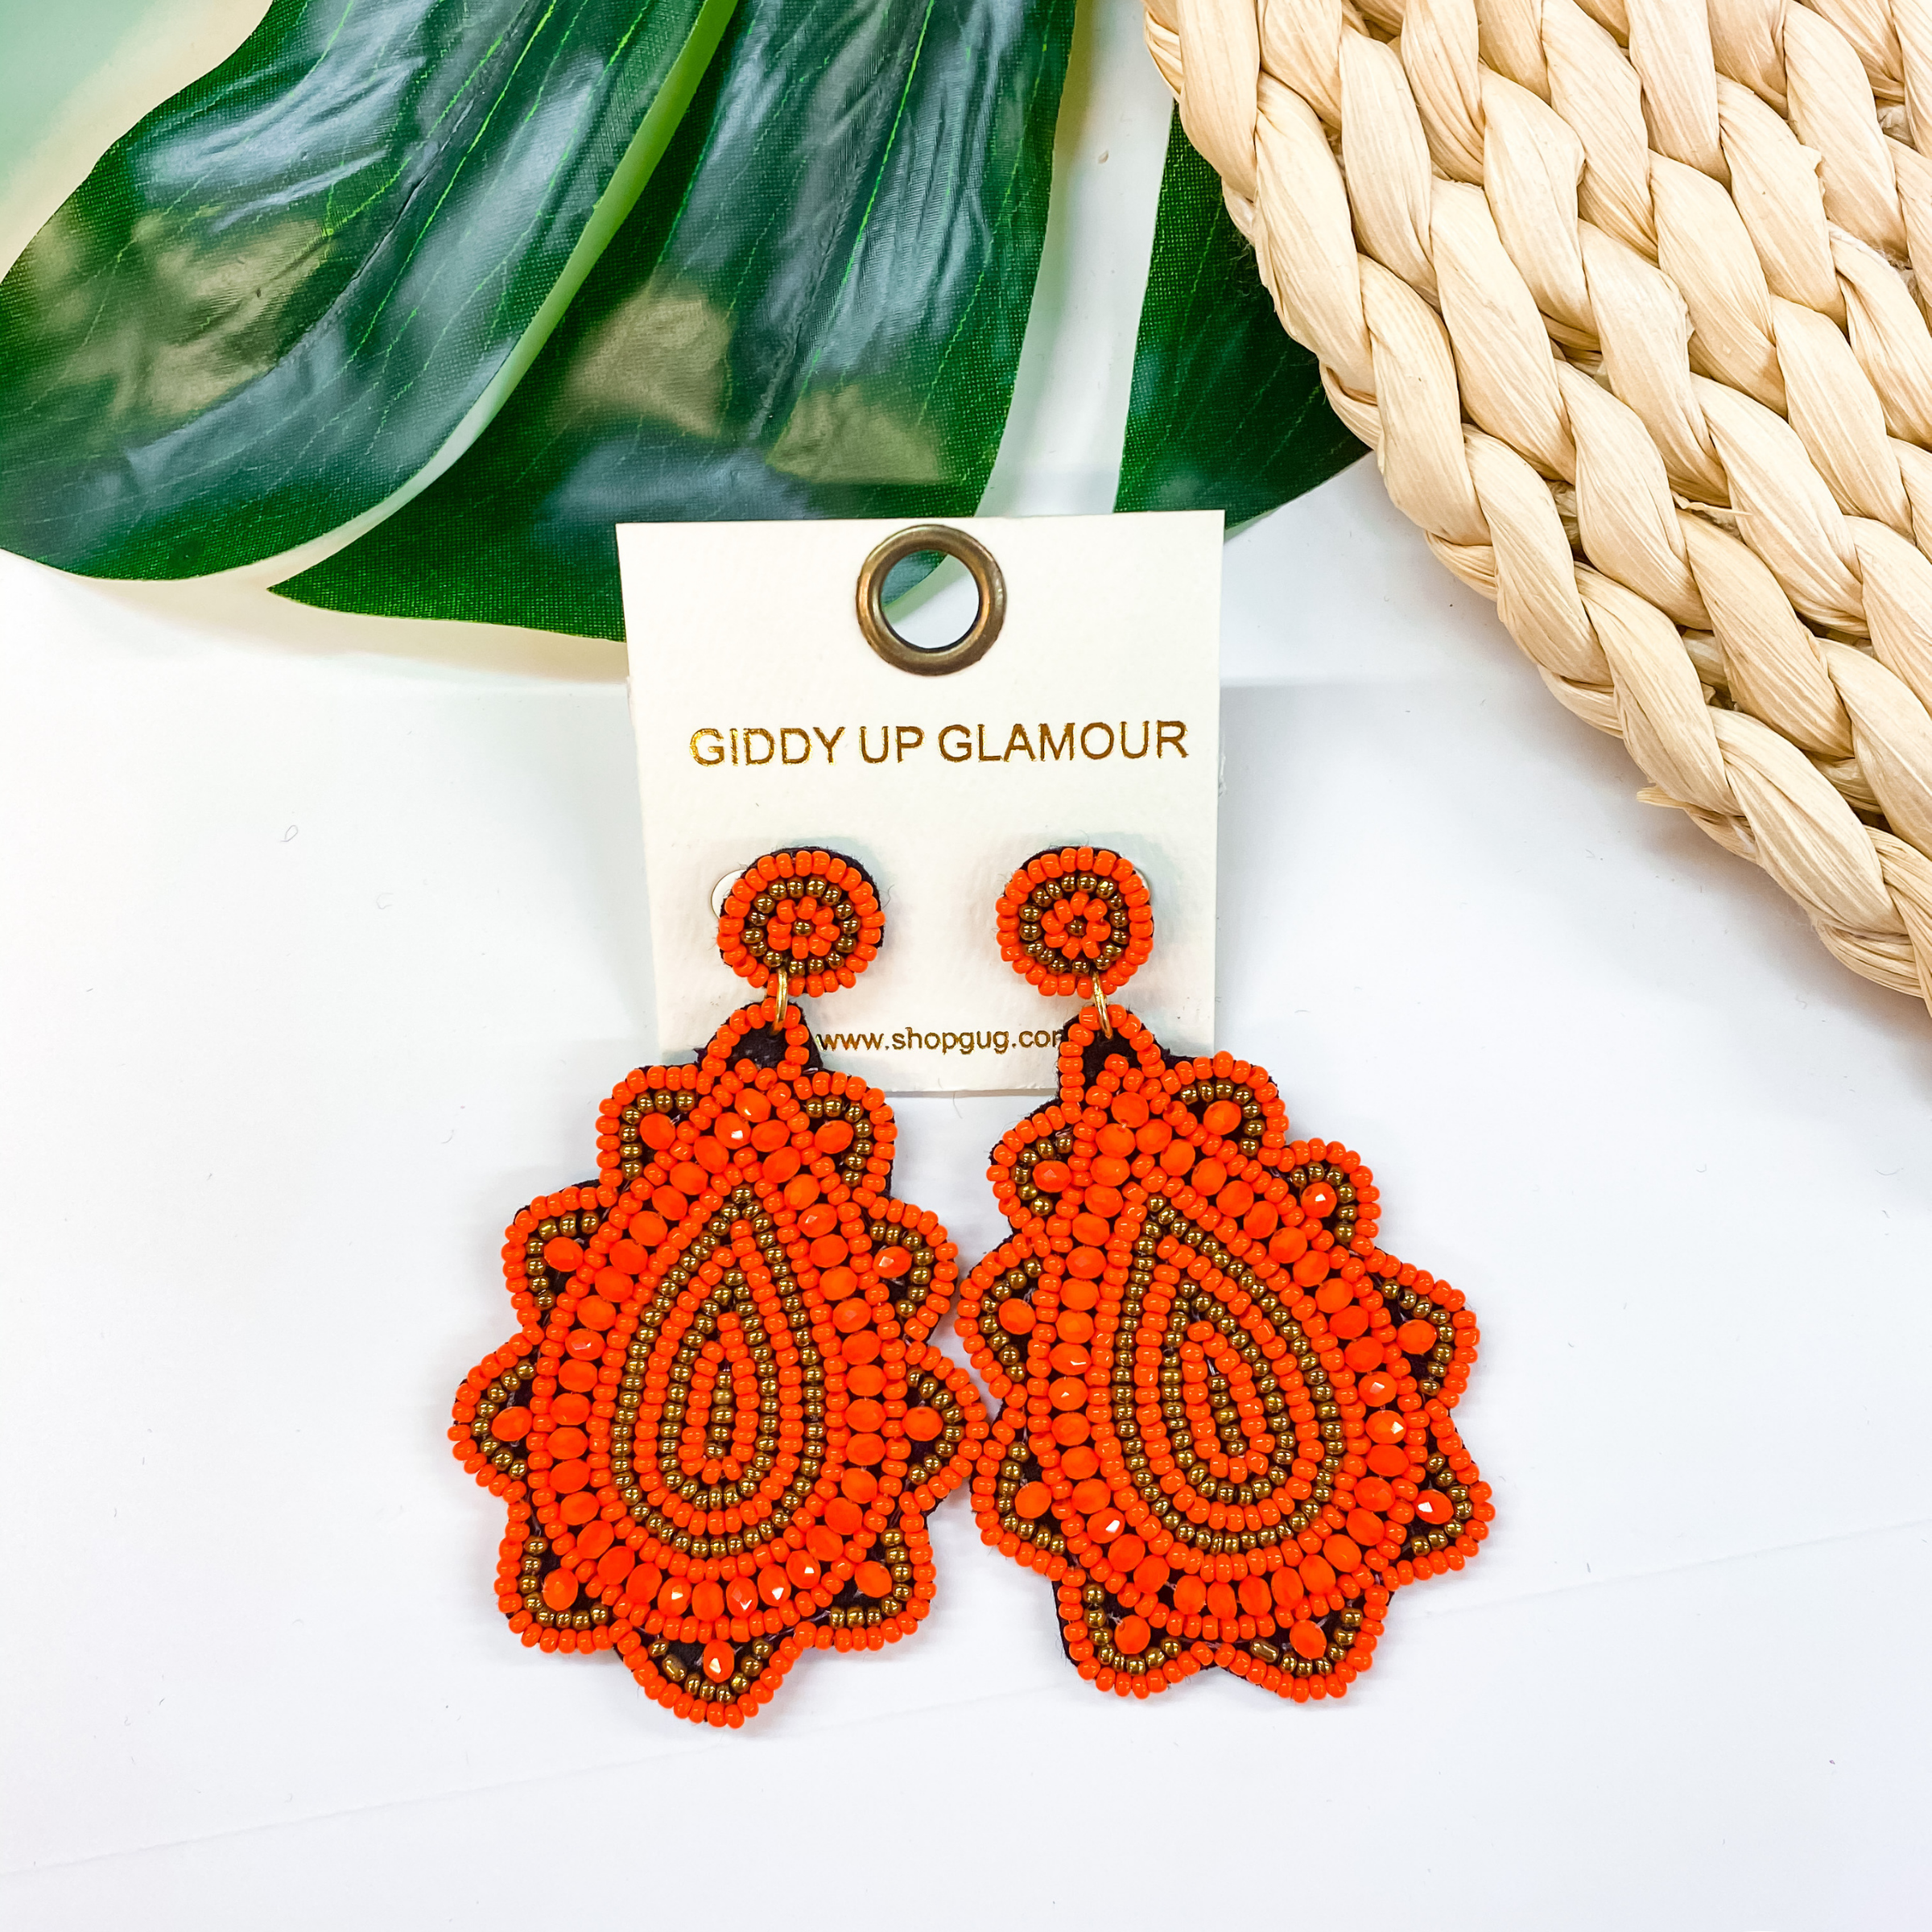 Light Up The Night Seed Bead Teardrop Earrings in Orange - Giddy Up Glamour Boutique